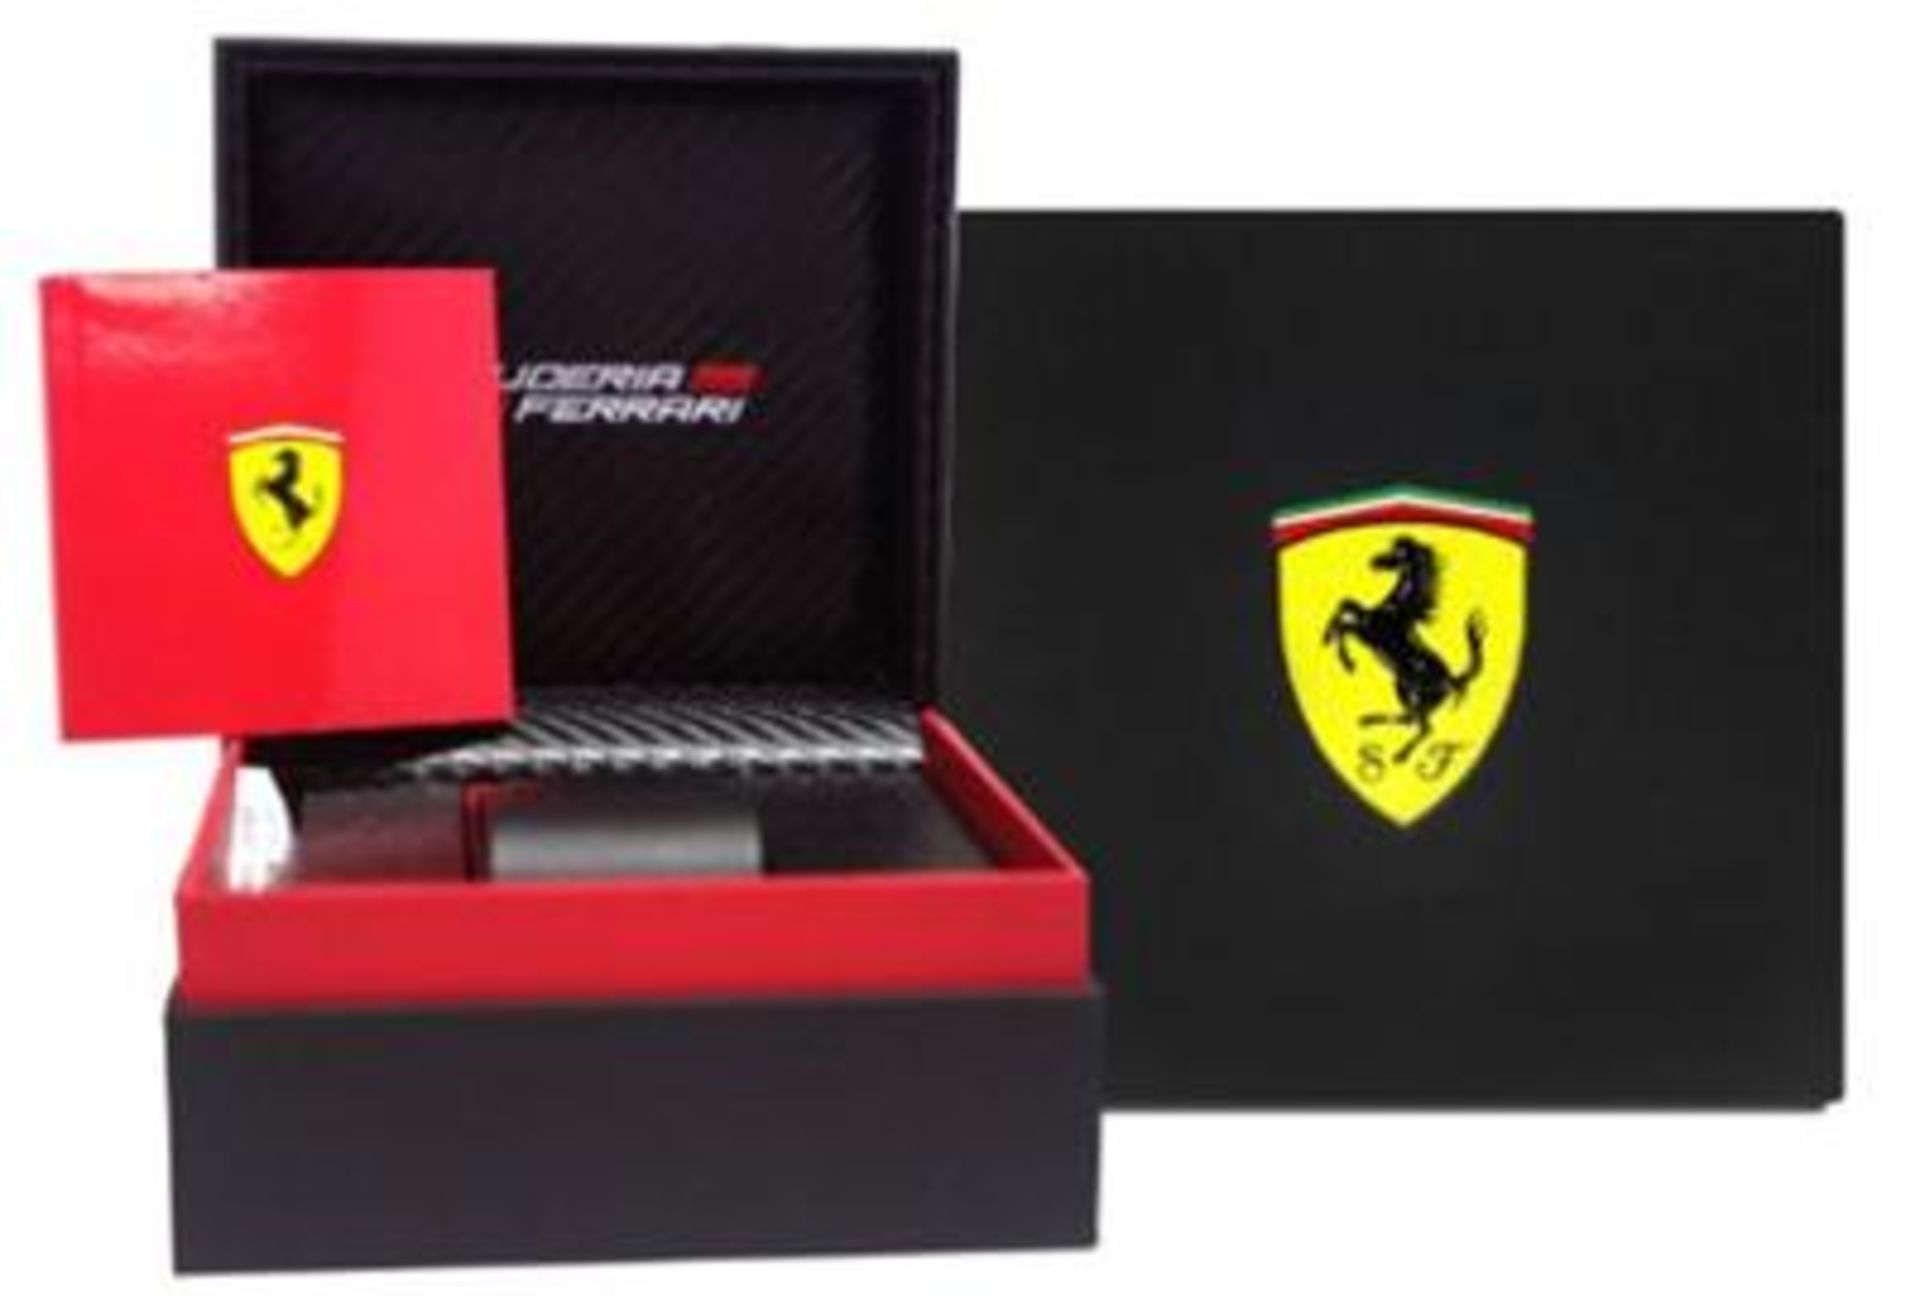 BOXED BRAND NEW SCUDERIA FERARRI RACE DAY ANALOG DISPLAY QUARTZ WRIST WATCH WITH 2 YEARS - Image 2 of 2